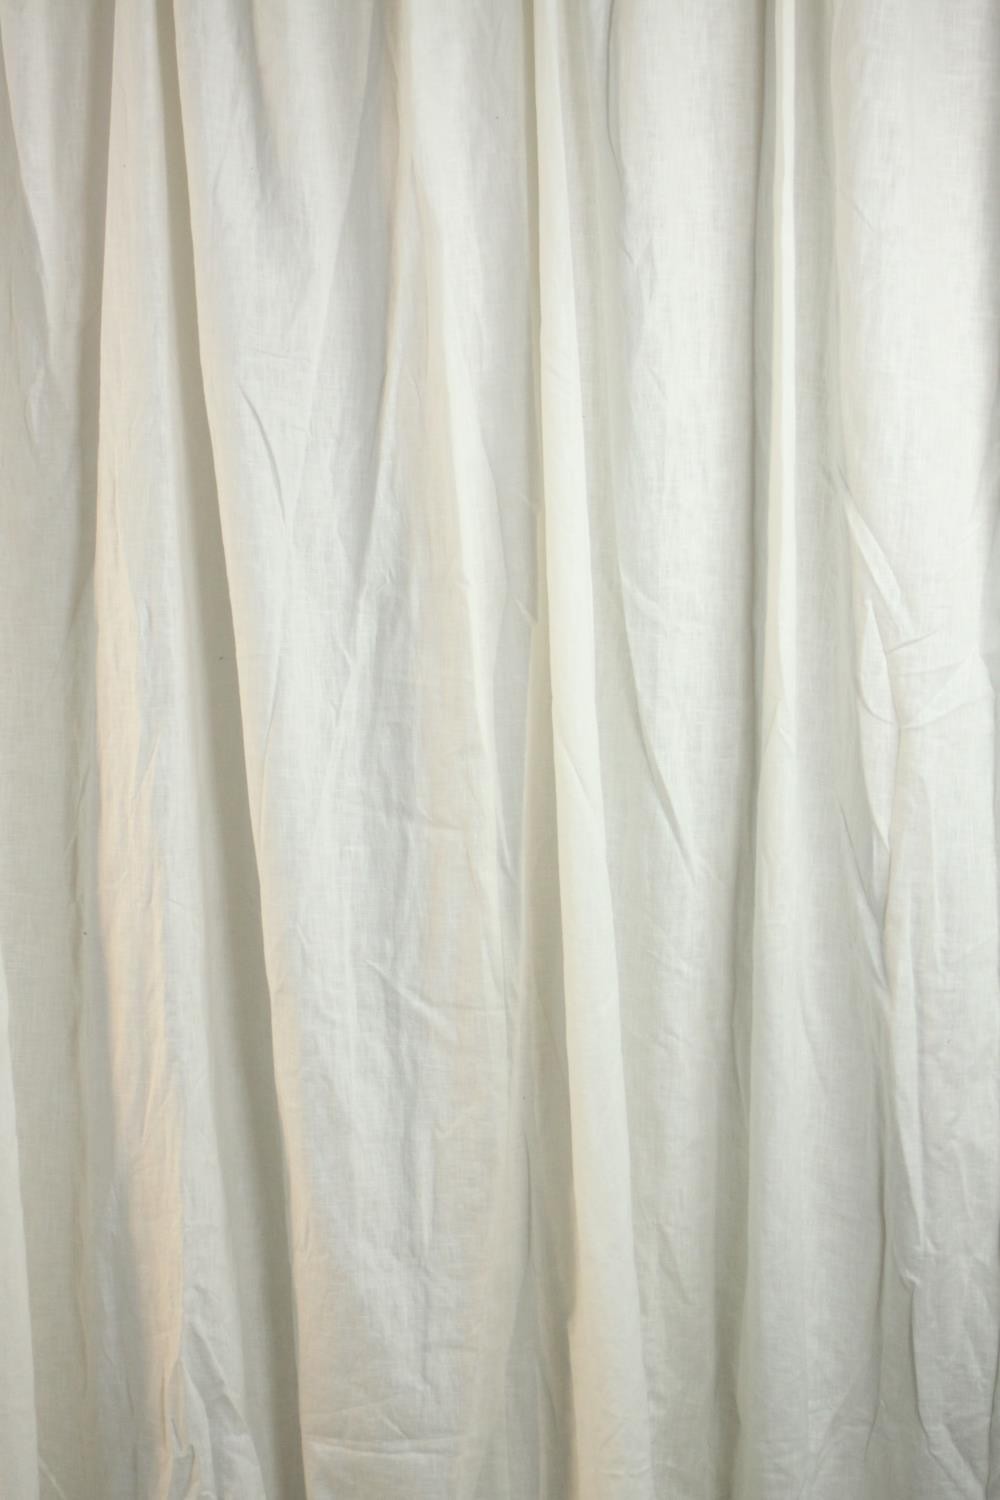 A pleated thin white curtain. L.250 W.260cm. - Image 2 of 5